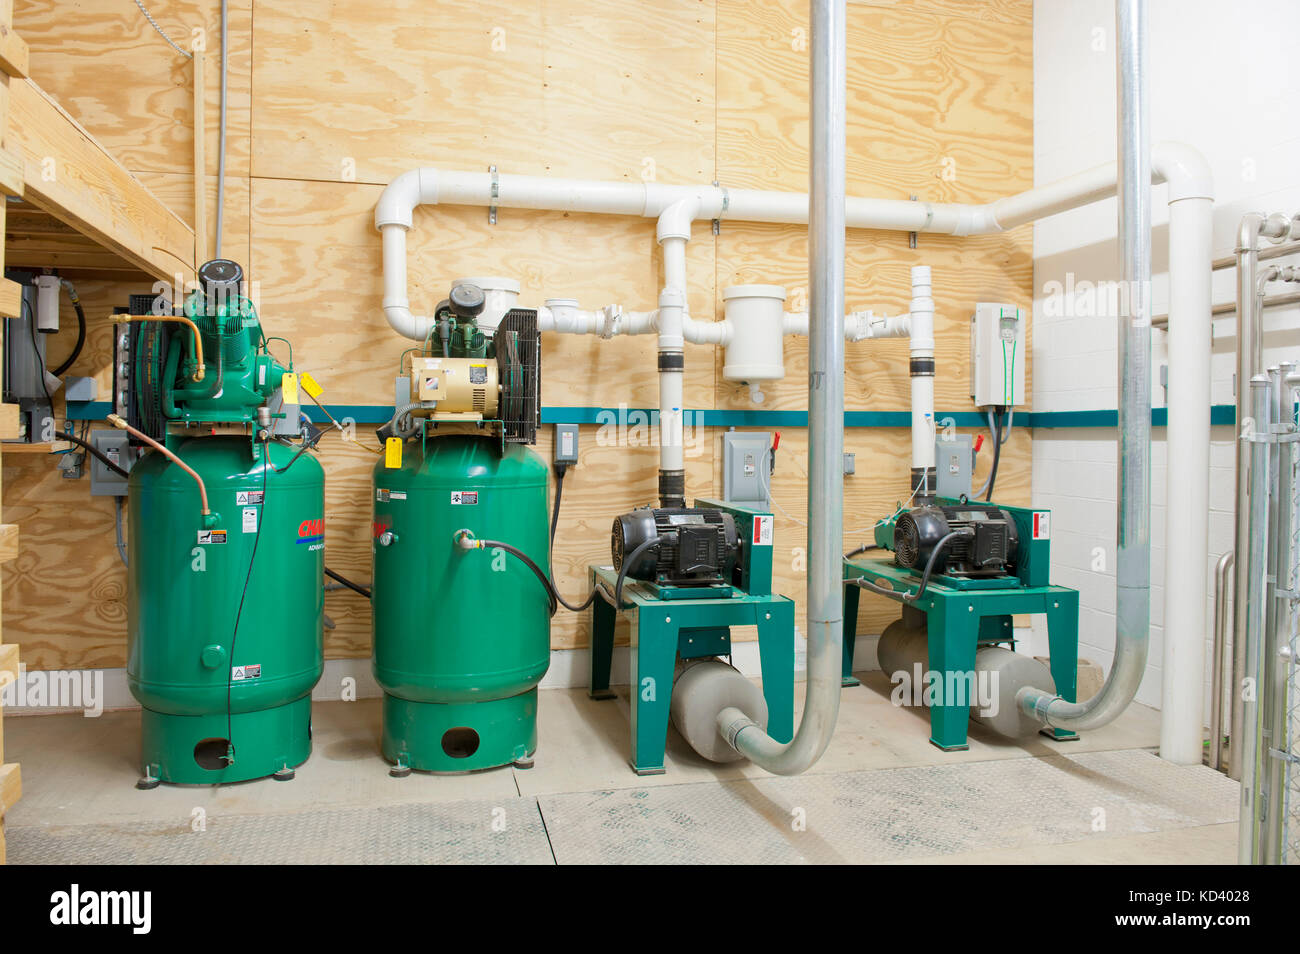 COMPRESSORS AND PUMPS AT AUTOMATED MILKING PARLOR Stock Photo